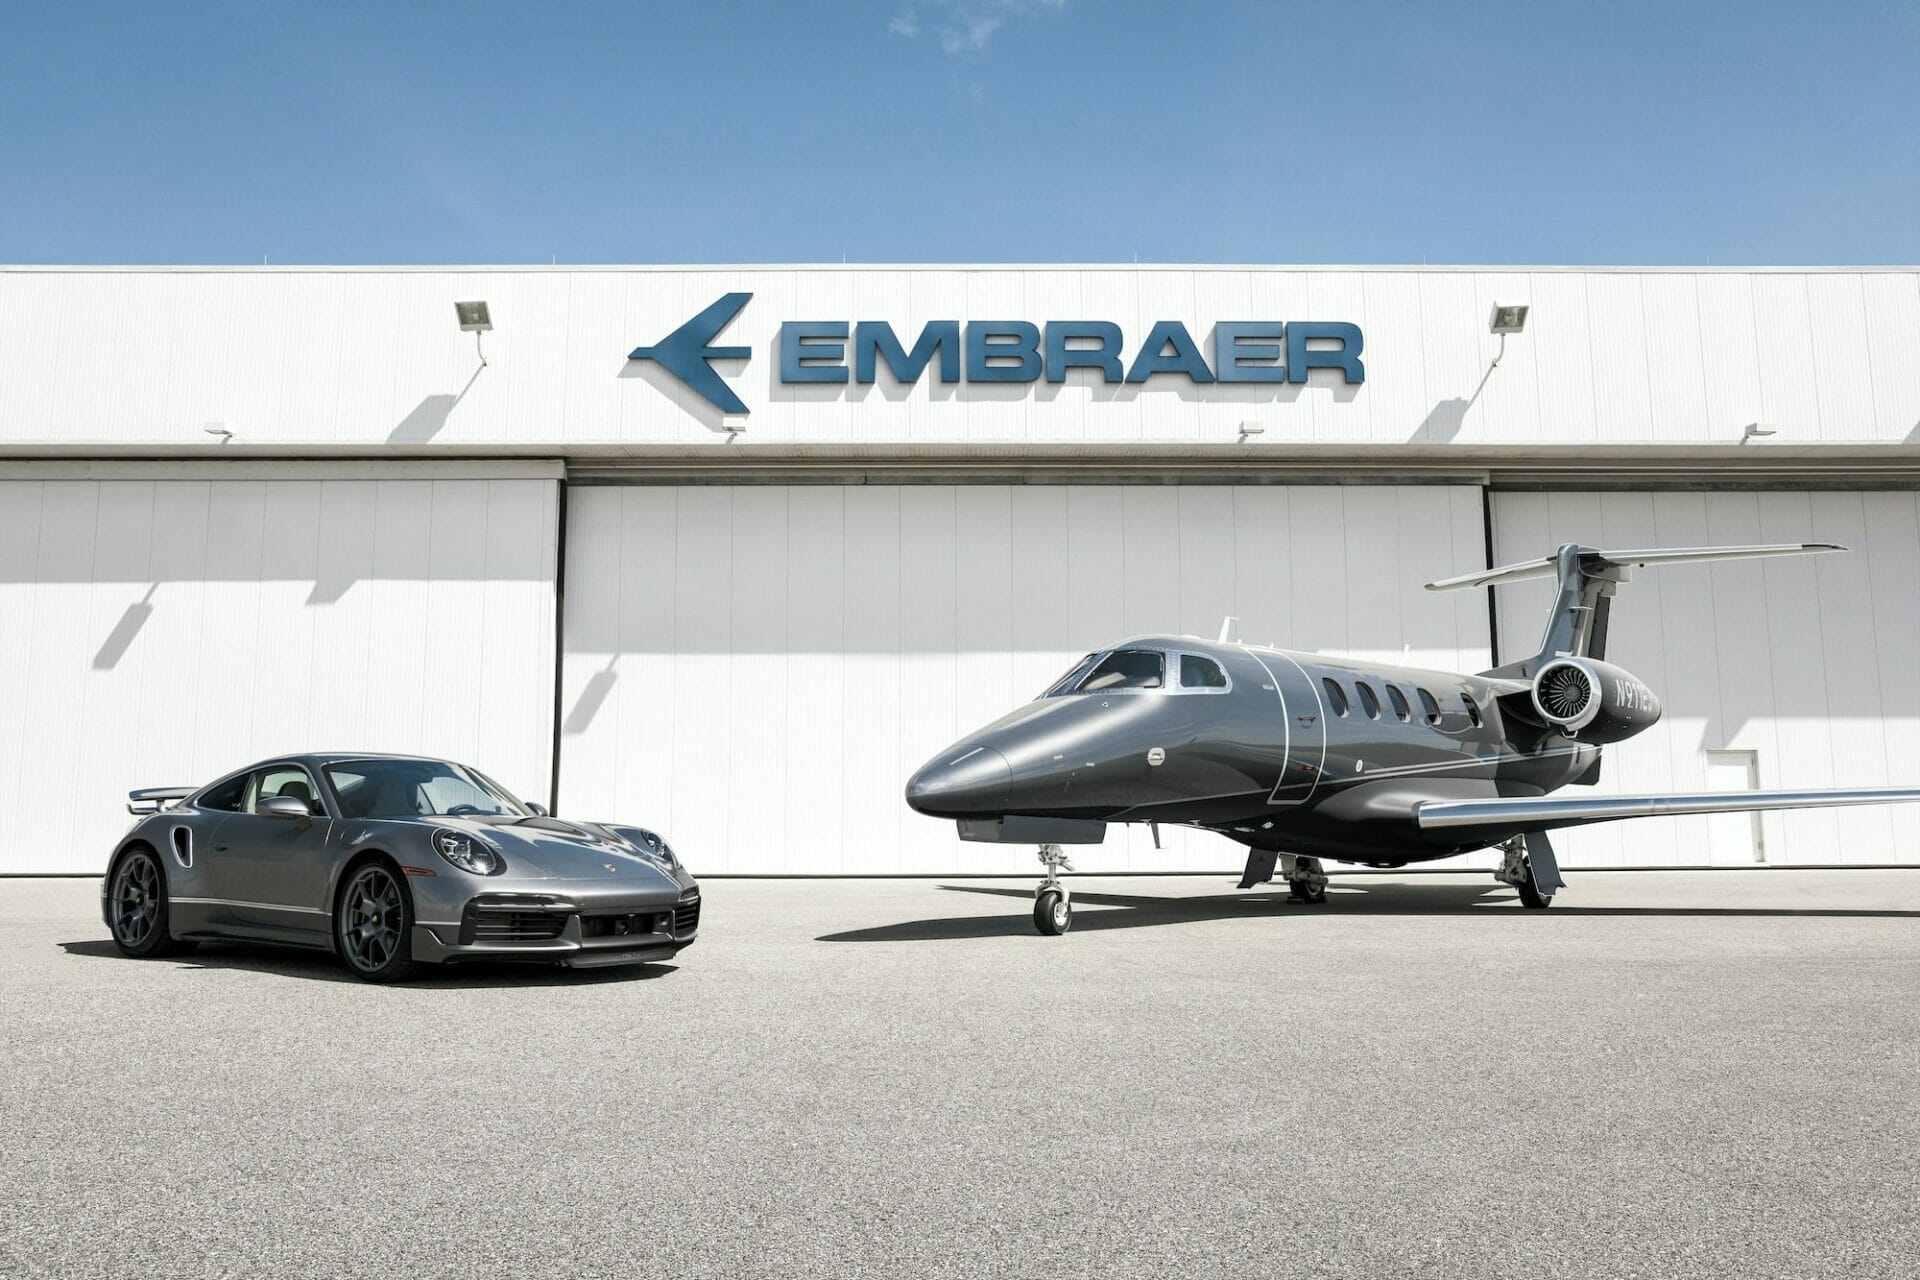 Porsche and Embraer - purchasing a private jet